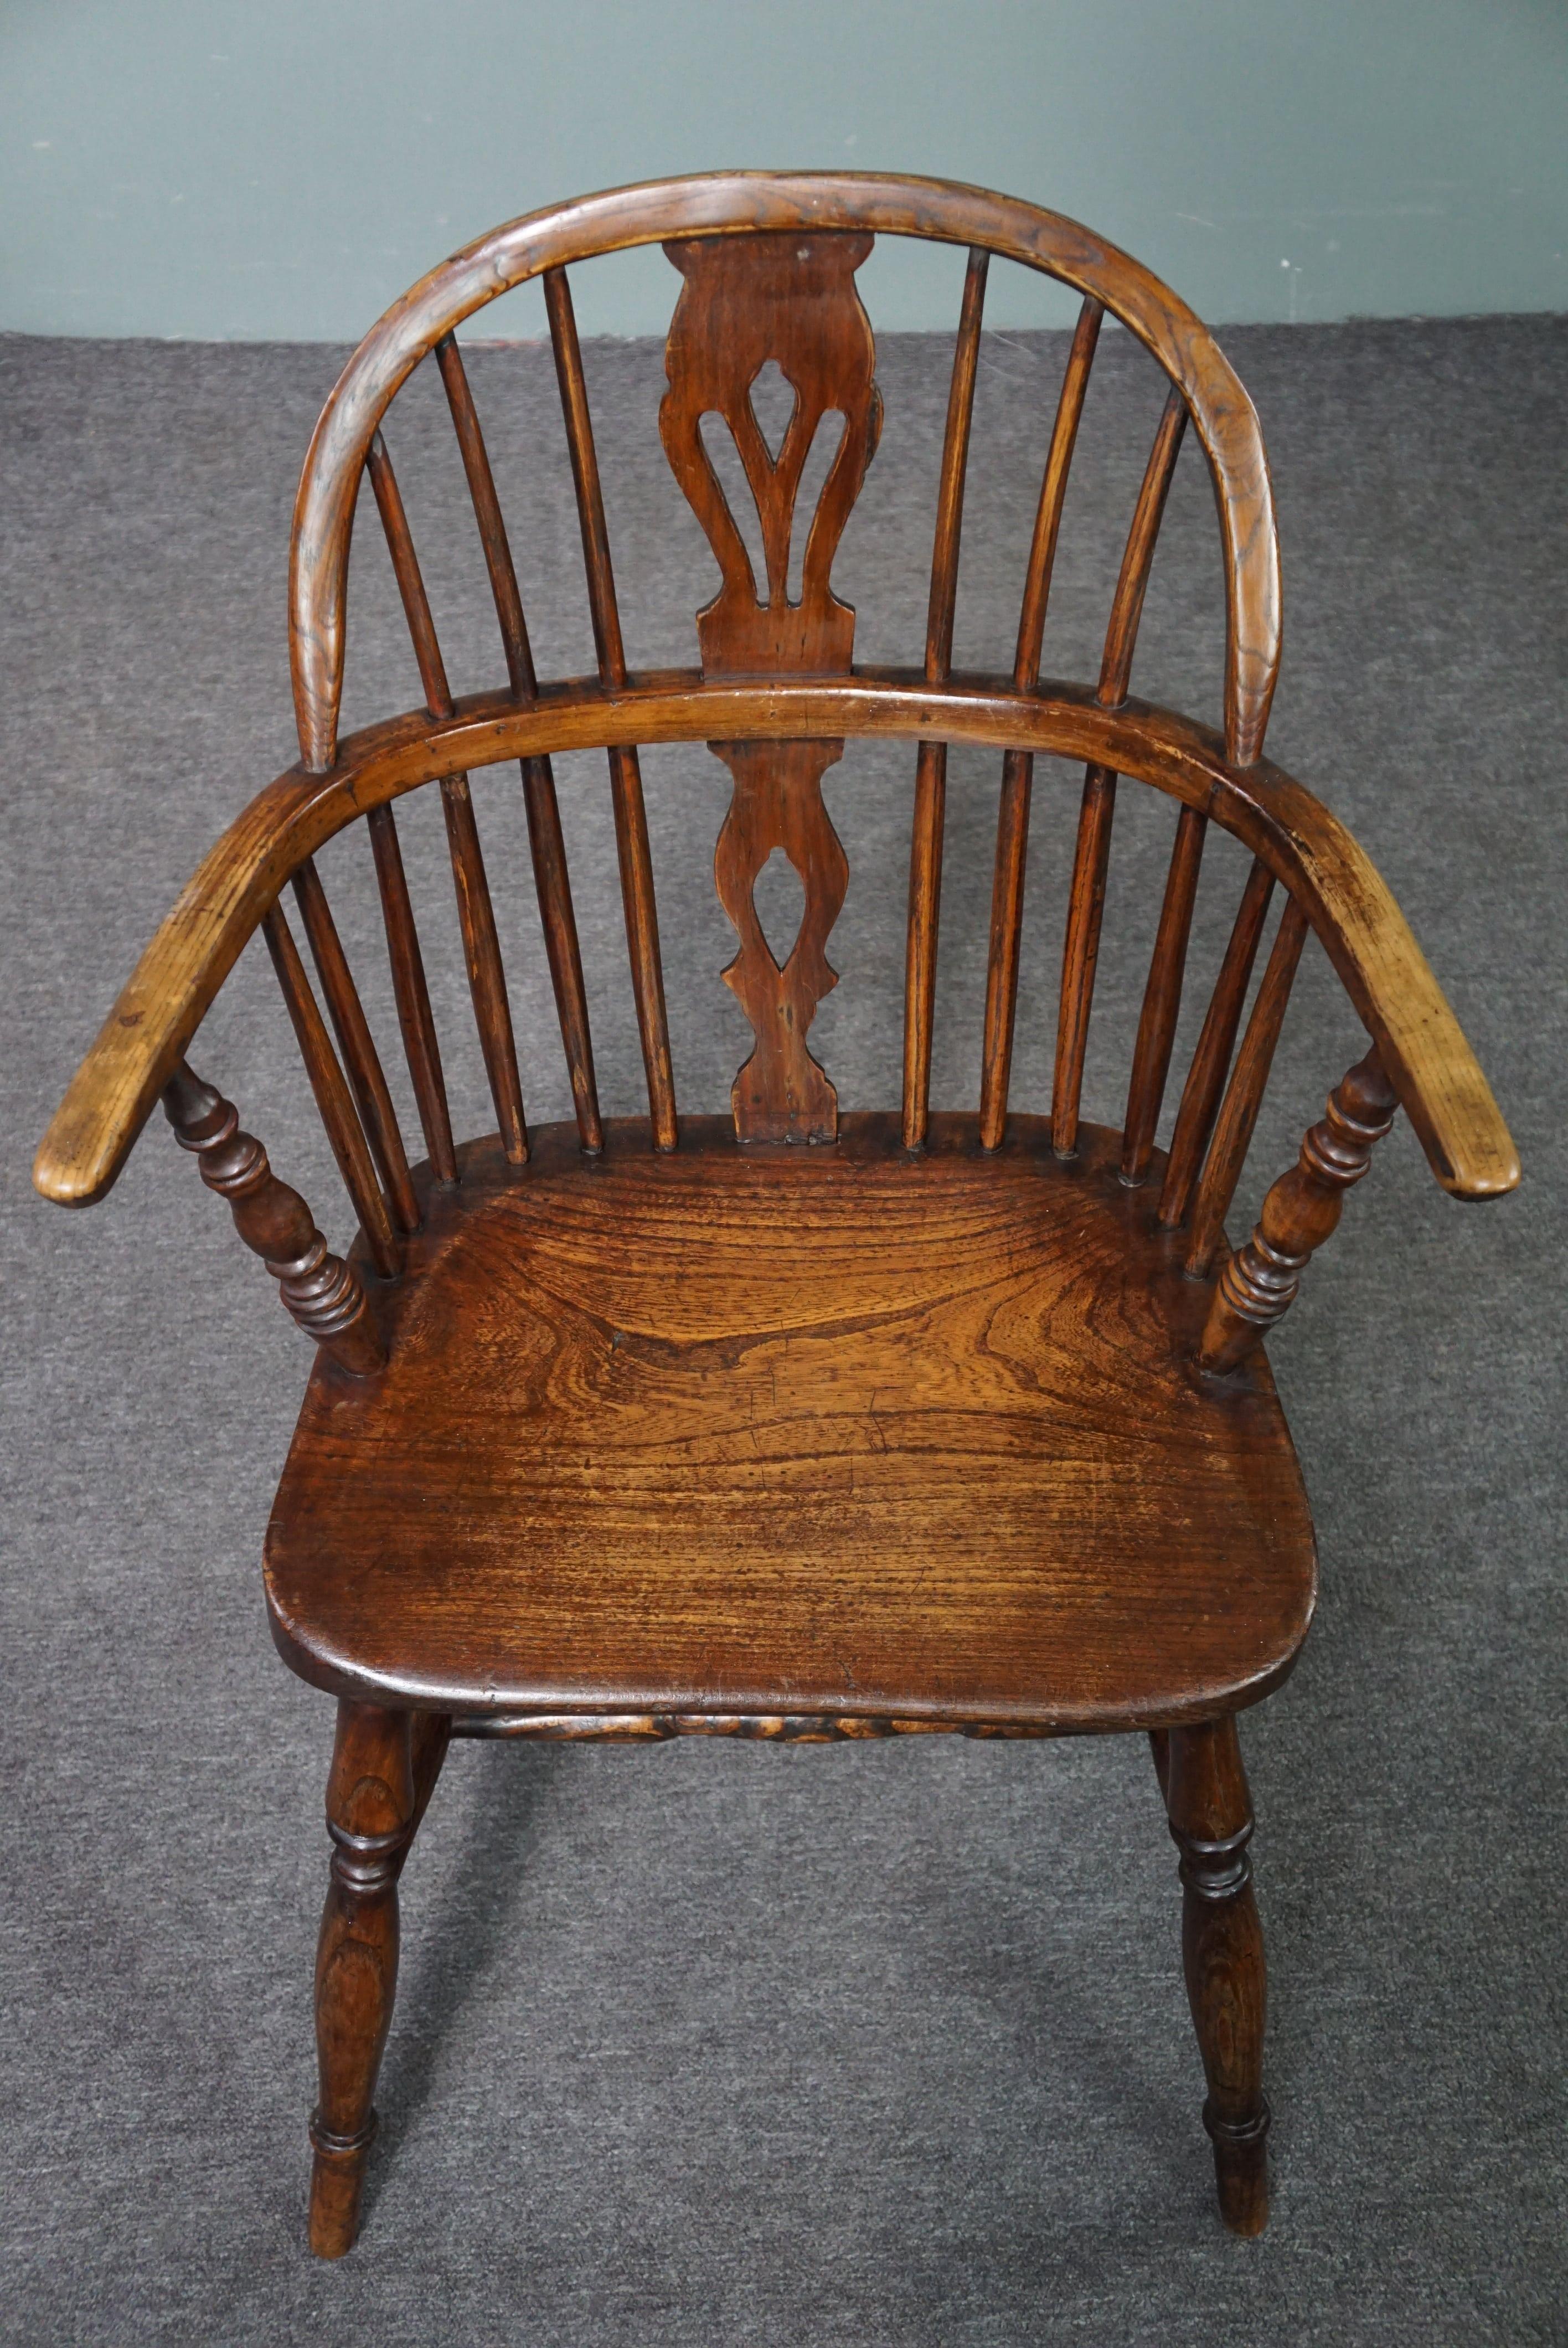 Antique English Low Back Windsor chair/armchair, 18th century For Sale 1